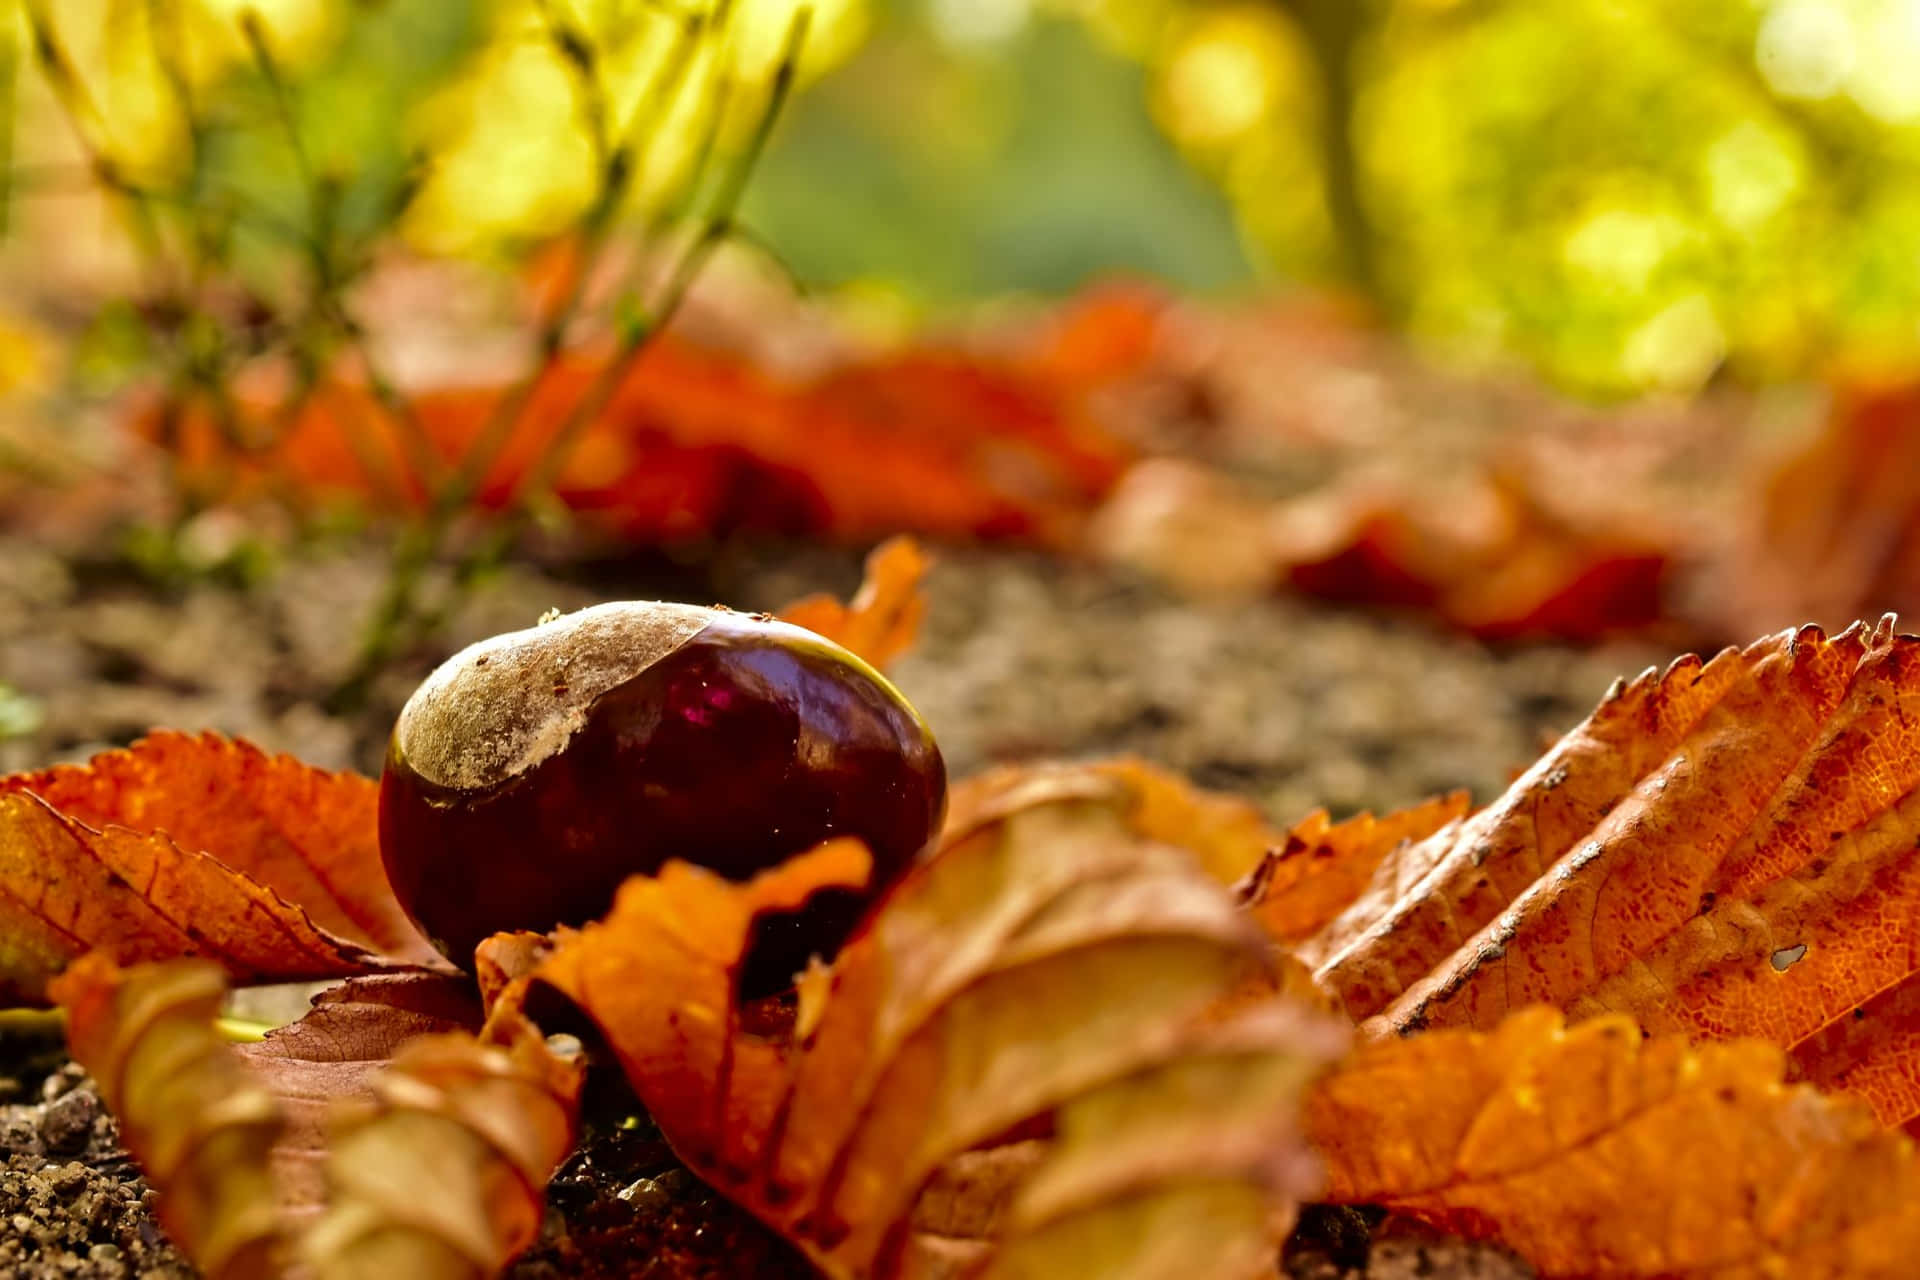 Capture the beauty of the Autumn season with this stunning Nature Fall landscape.